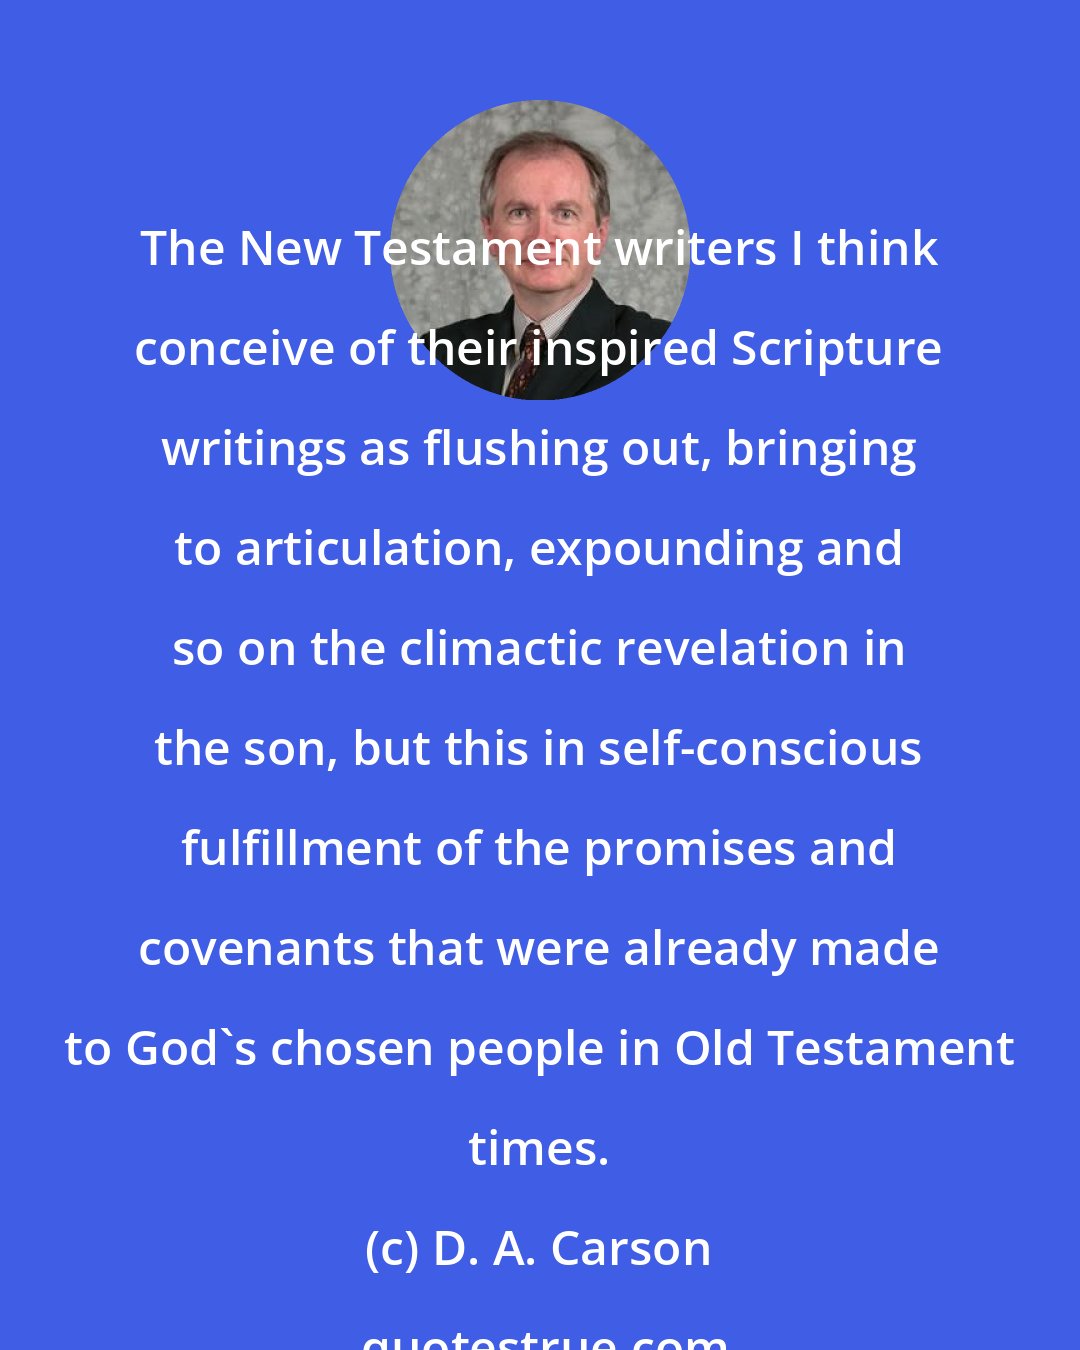 D. A. Carson: The New Testament writers I think conceive of their inspired Scripture writings as flushing out, bringing to articulation, expounding and so on the climactic revelation in the son, but this in self-conscious fulfillment of the promises and covenants that were already made to God's chosen people in Old Testament times.